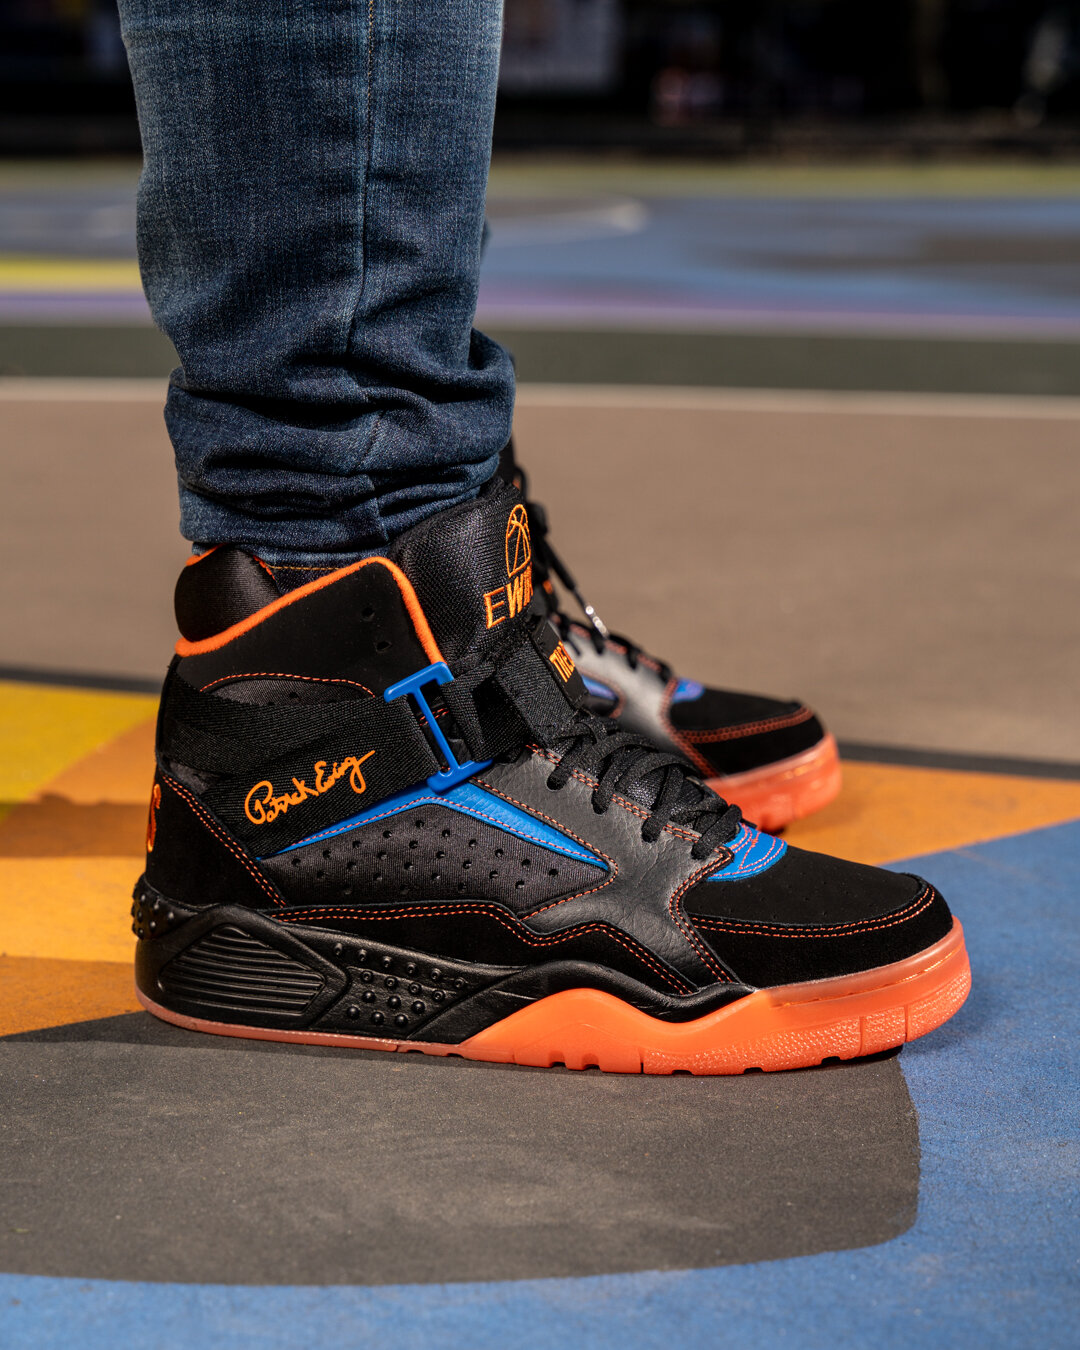 Ewing Athletics Goes Way Up on John Starks Inspired “The Dunk